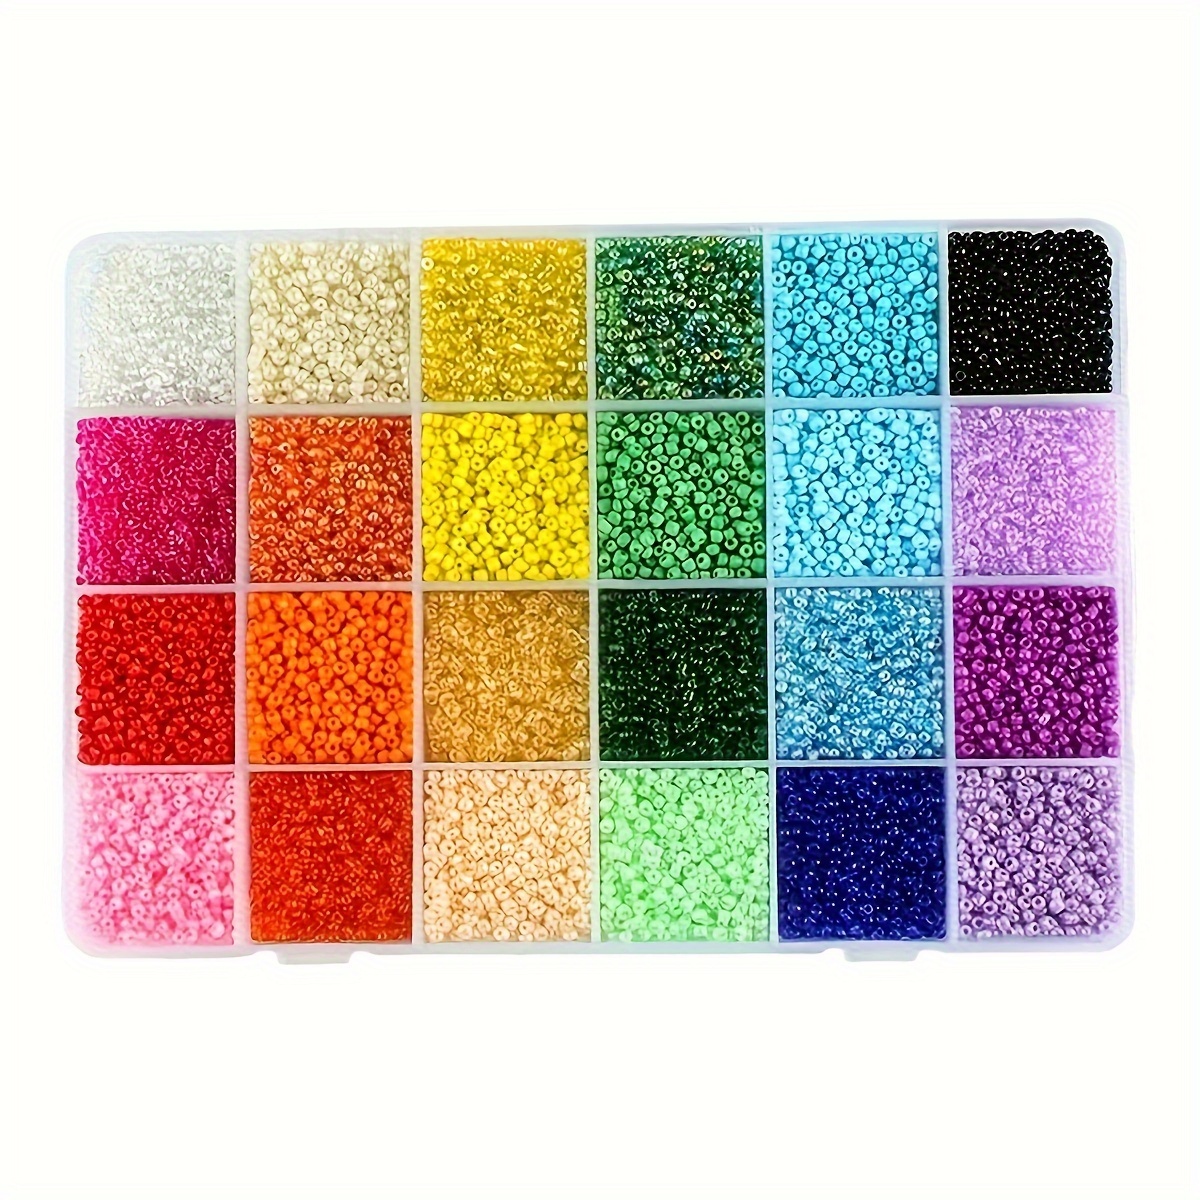 

Diy 24 Grids Set Box With 24 Random Colors Of 3mm Glass Millet Beads. 1 Box Can Be Used To Make Bracelets, Necklaces, Mobile Phone Chains, And Various Diy Accessories.